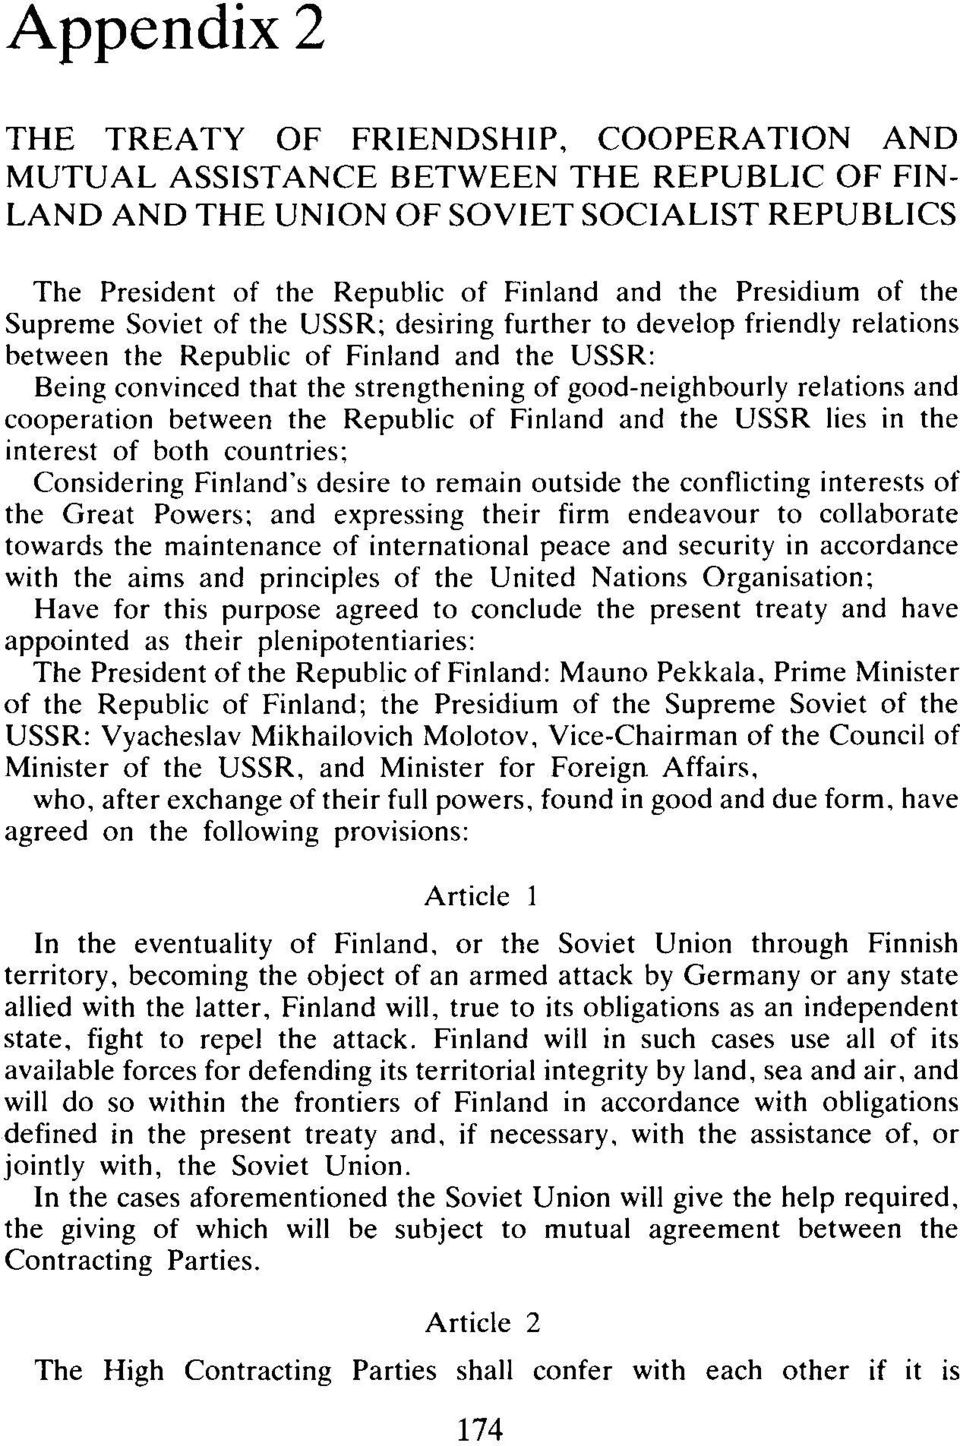 relations and cooperation between the Republic of Finland and the USSR lies in the interest of both countries; Considering Finland's desire to remain outside the conflicting interests of the Great